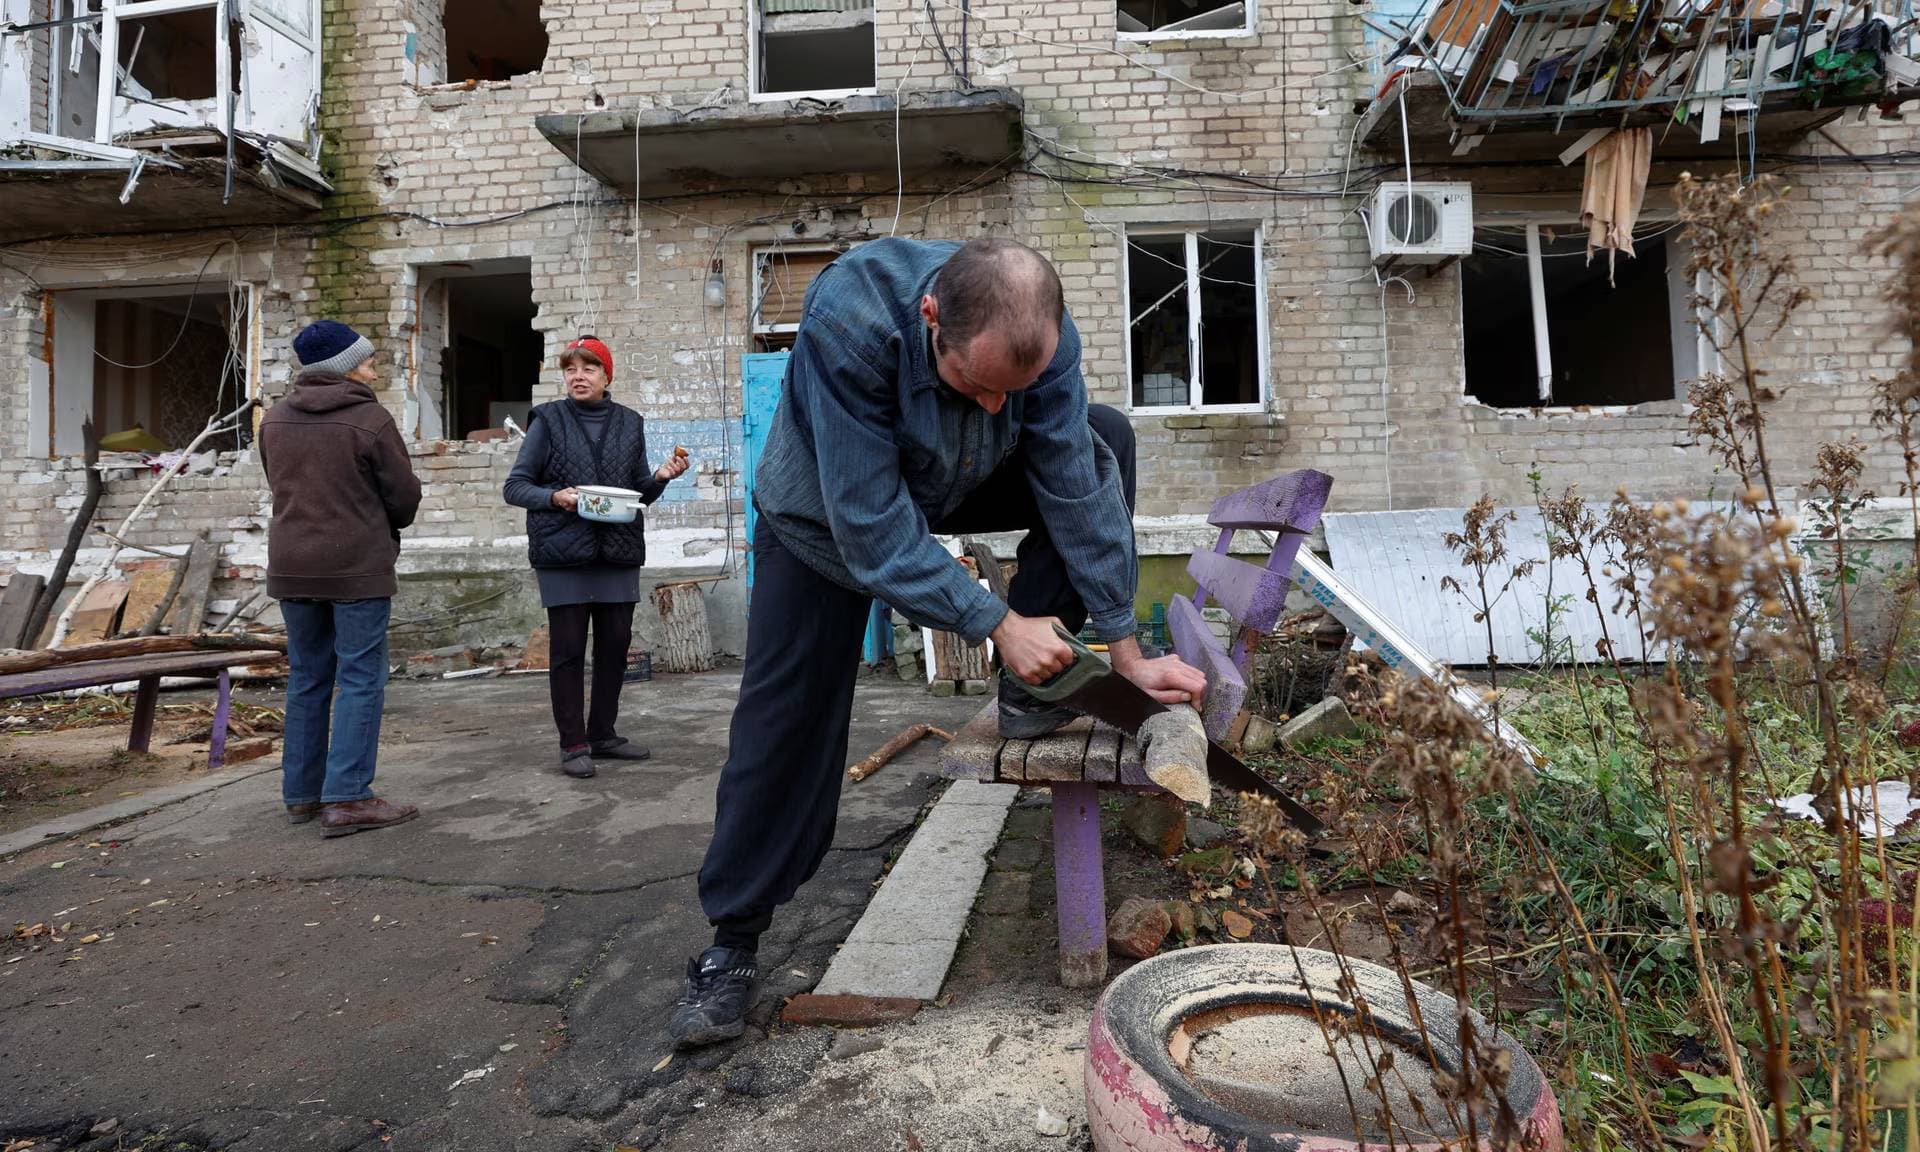 Local resident Oleksandr saws firewood next to his bombed-out apartment building in Avdiivka